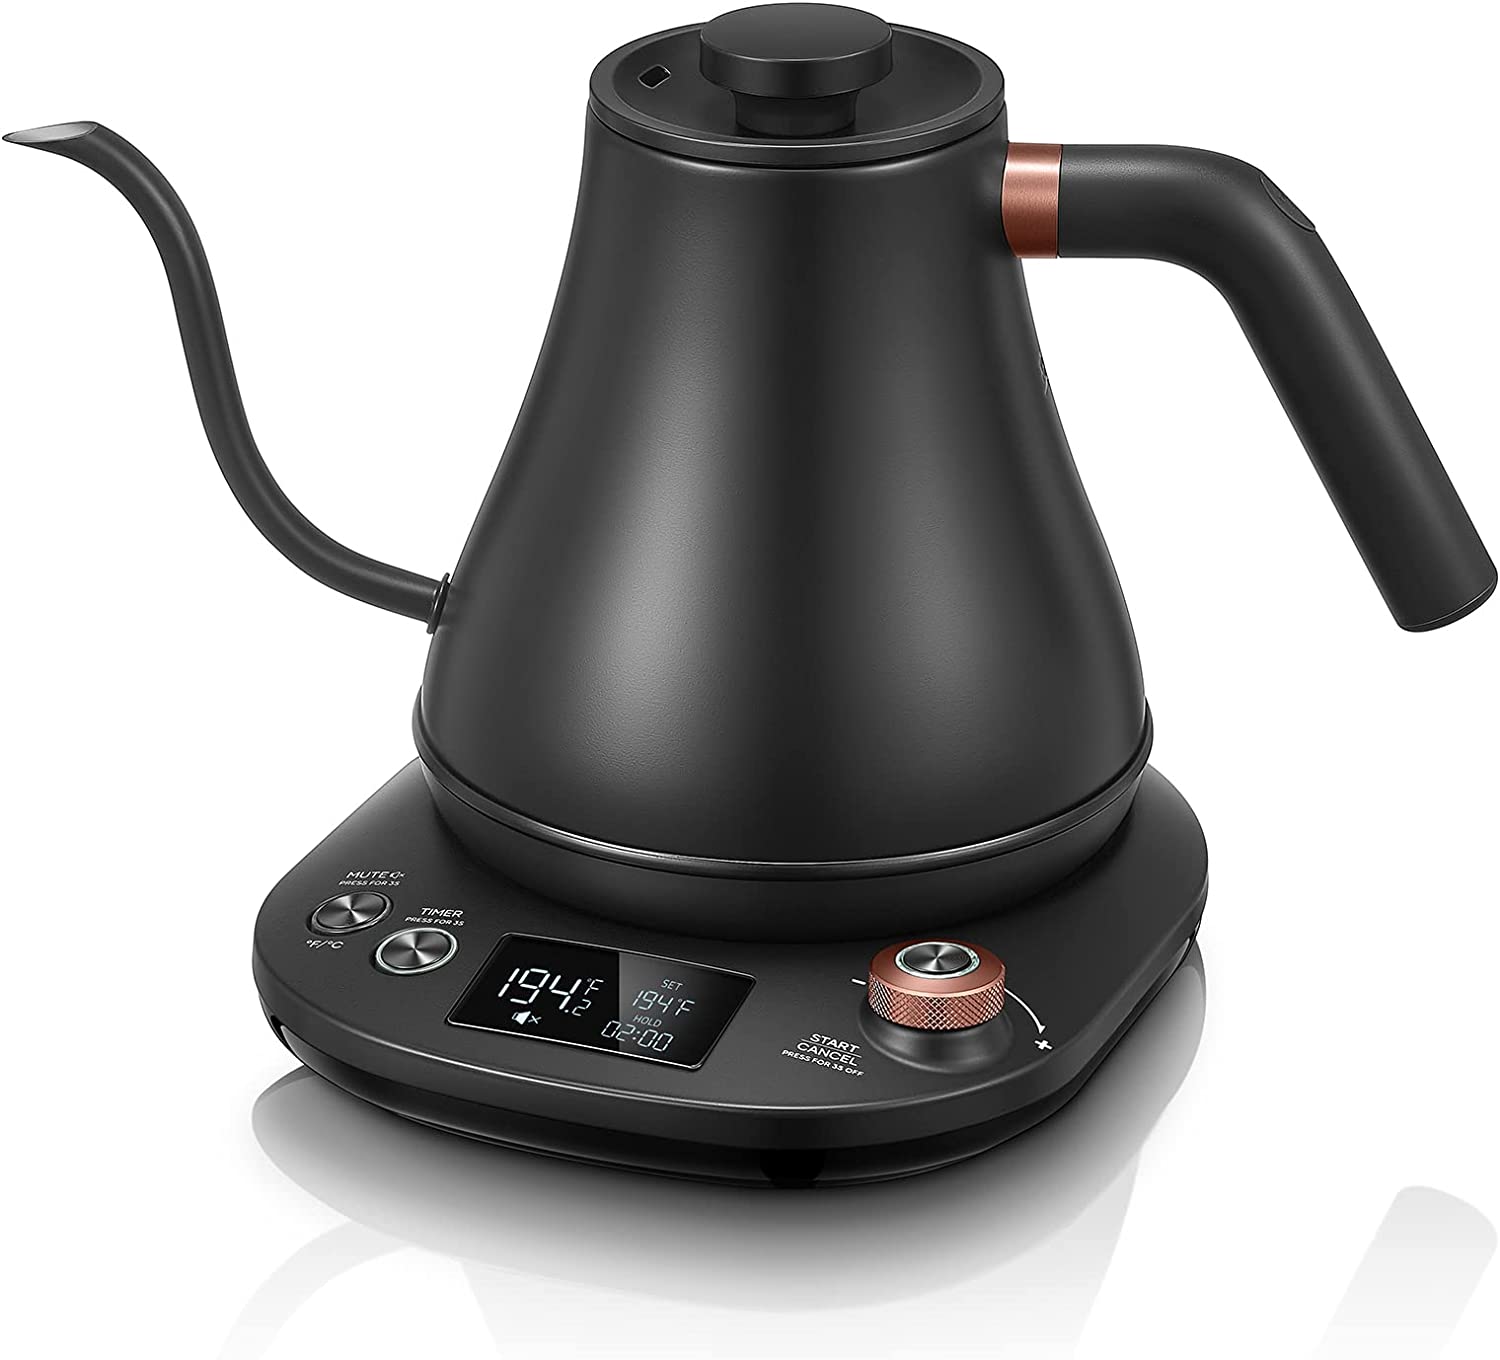 0.8L Electric Gooseneck Kettle Variable Temperature Control and